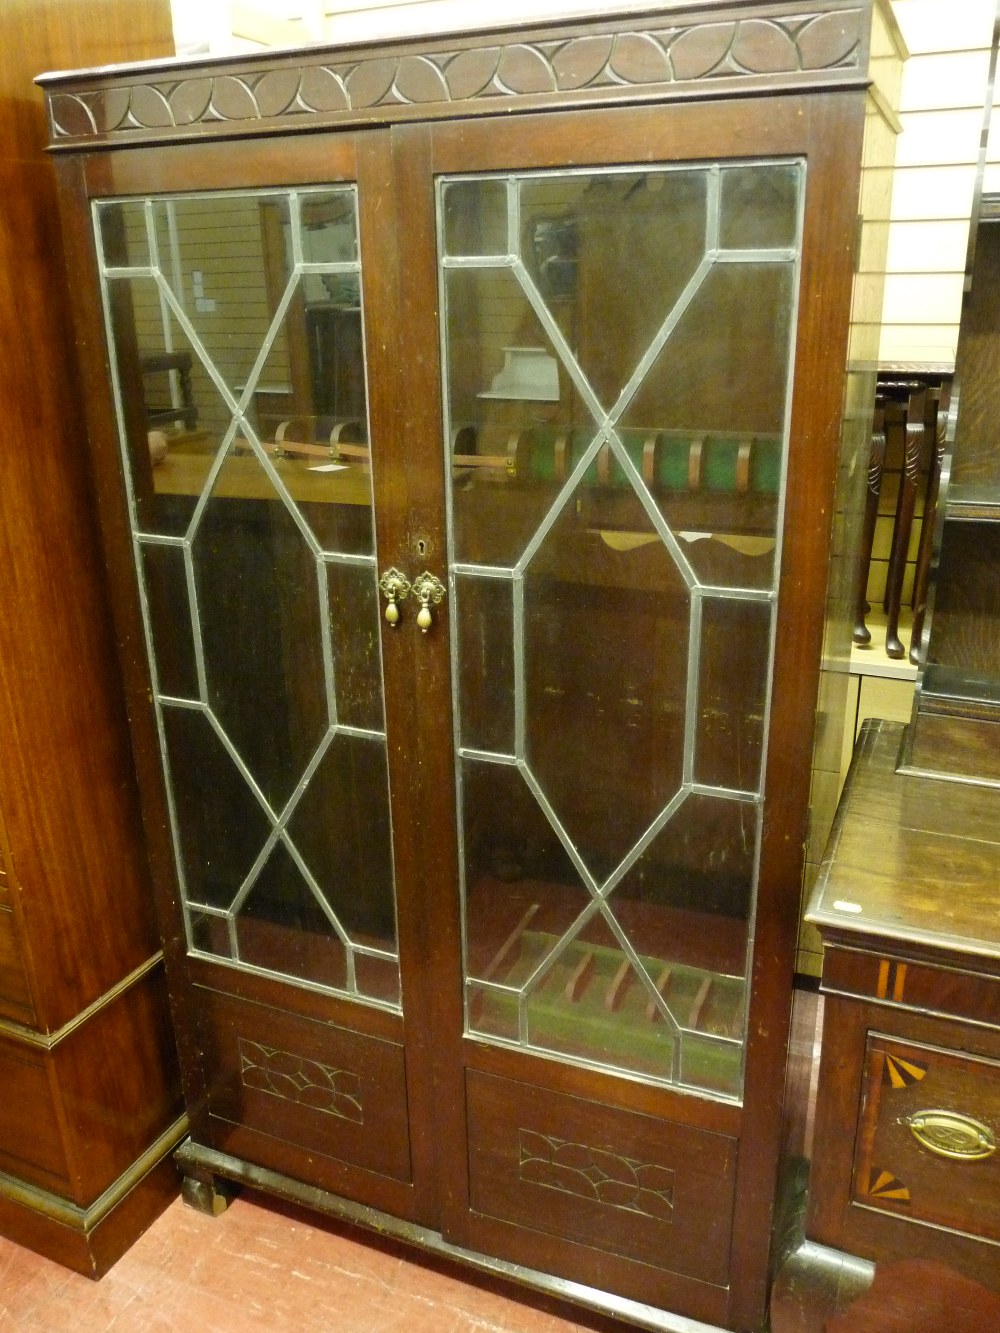 AN EARLY 20th CENTURY MAHOGANY GUN CABINET, the twin glazed doors with strip lead decoration and